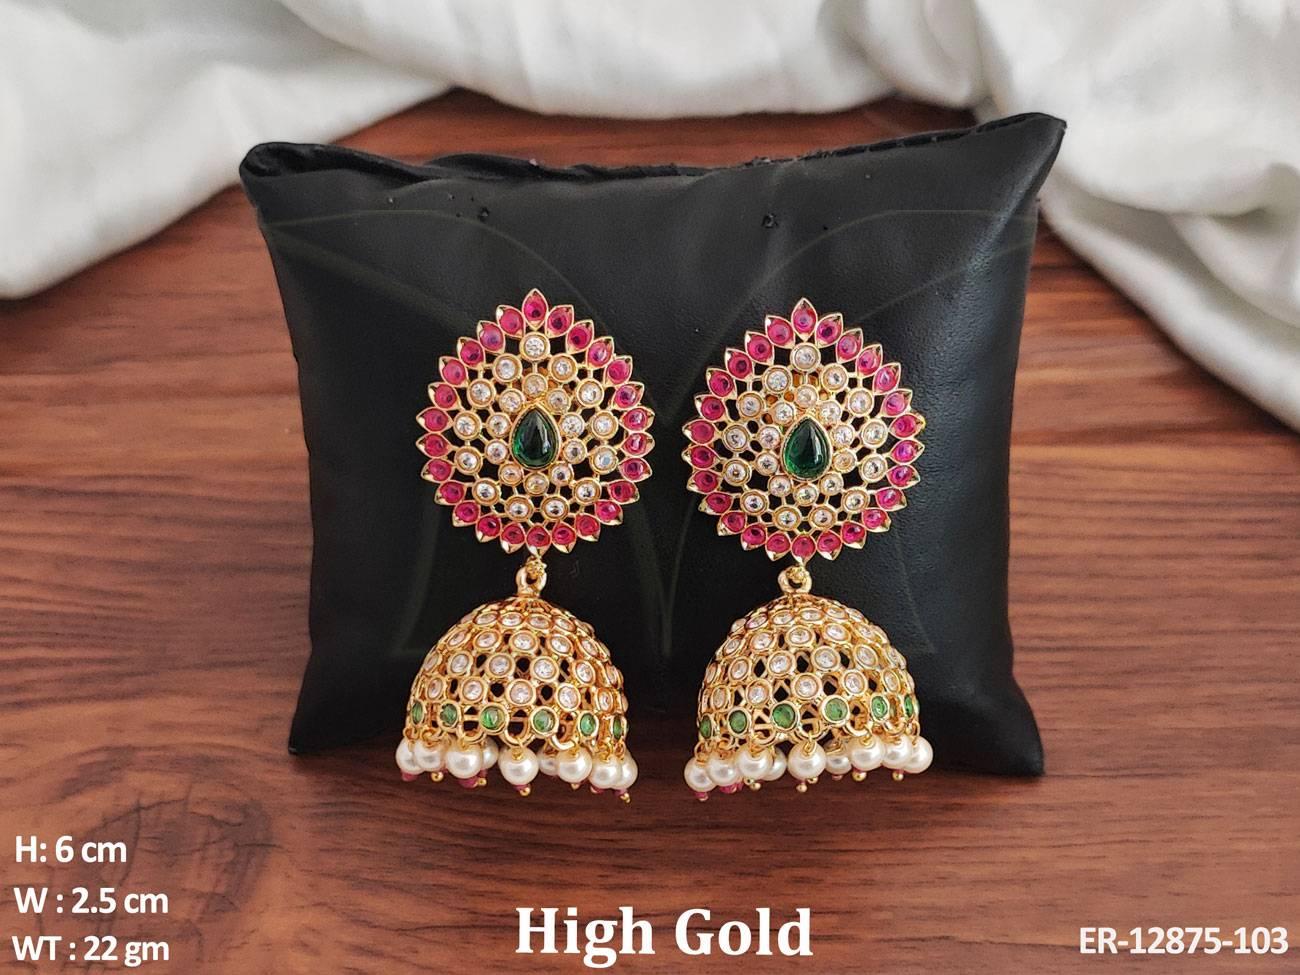 The High Gold Polish Party Wear Kemp Jewelry Accessories Fancy Jhumka Earrings Set is crafted with brass metal and boasts a high gold polish for a luxurious look.